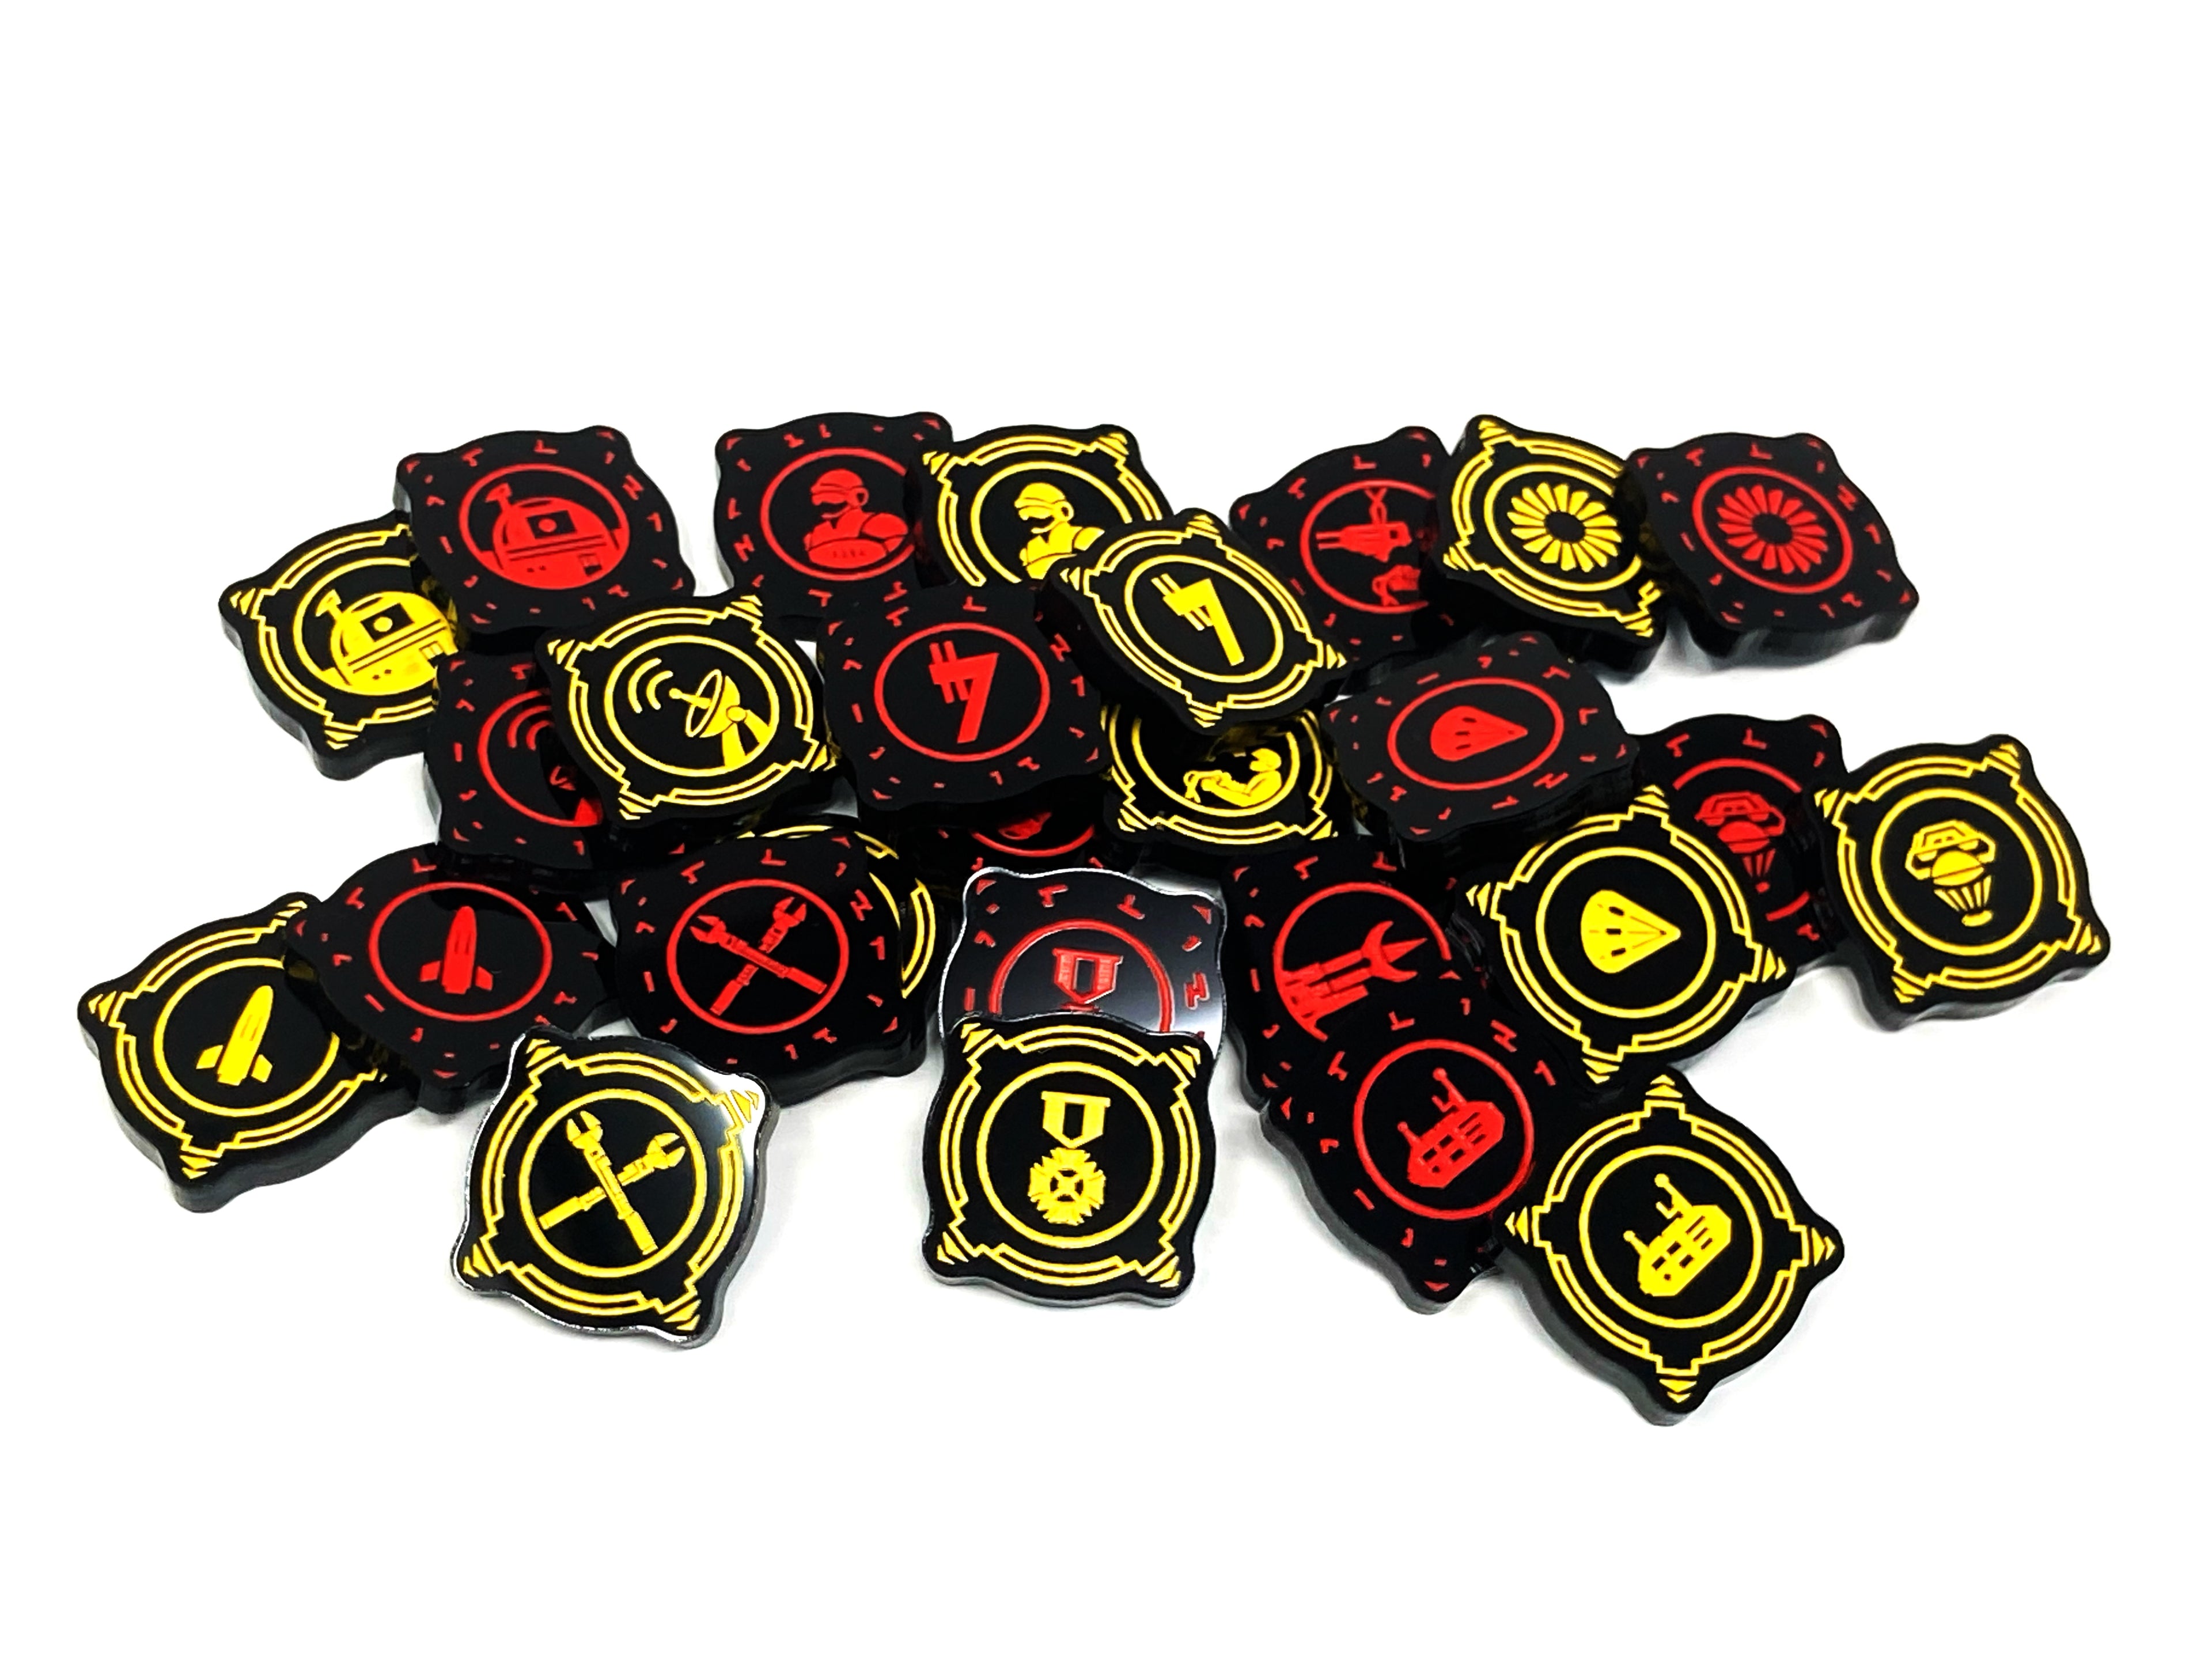 2 x Tactical Relay Droid Charge Tokens - Black Series (Double Sided)